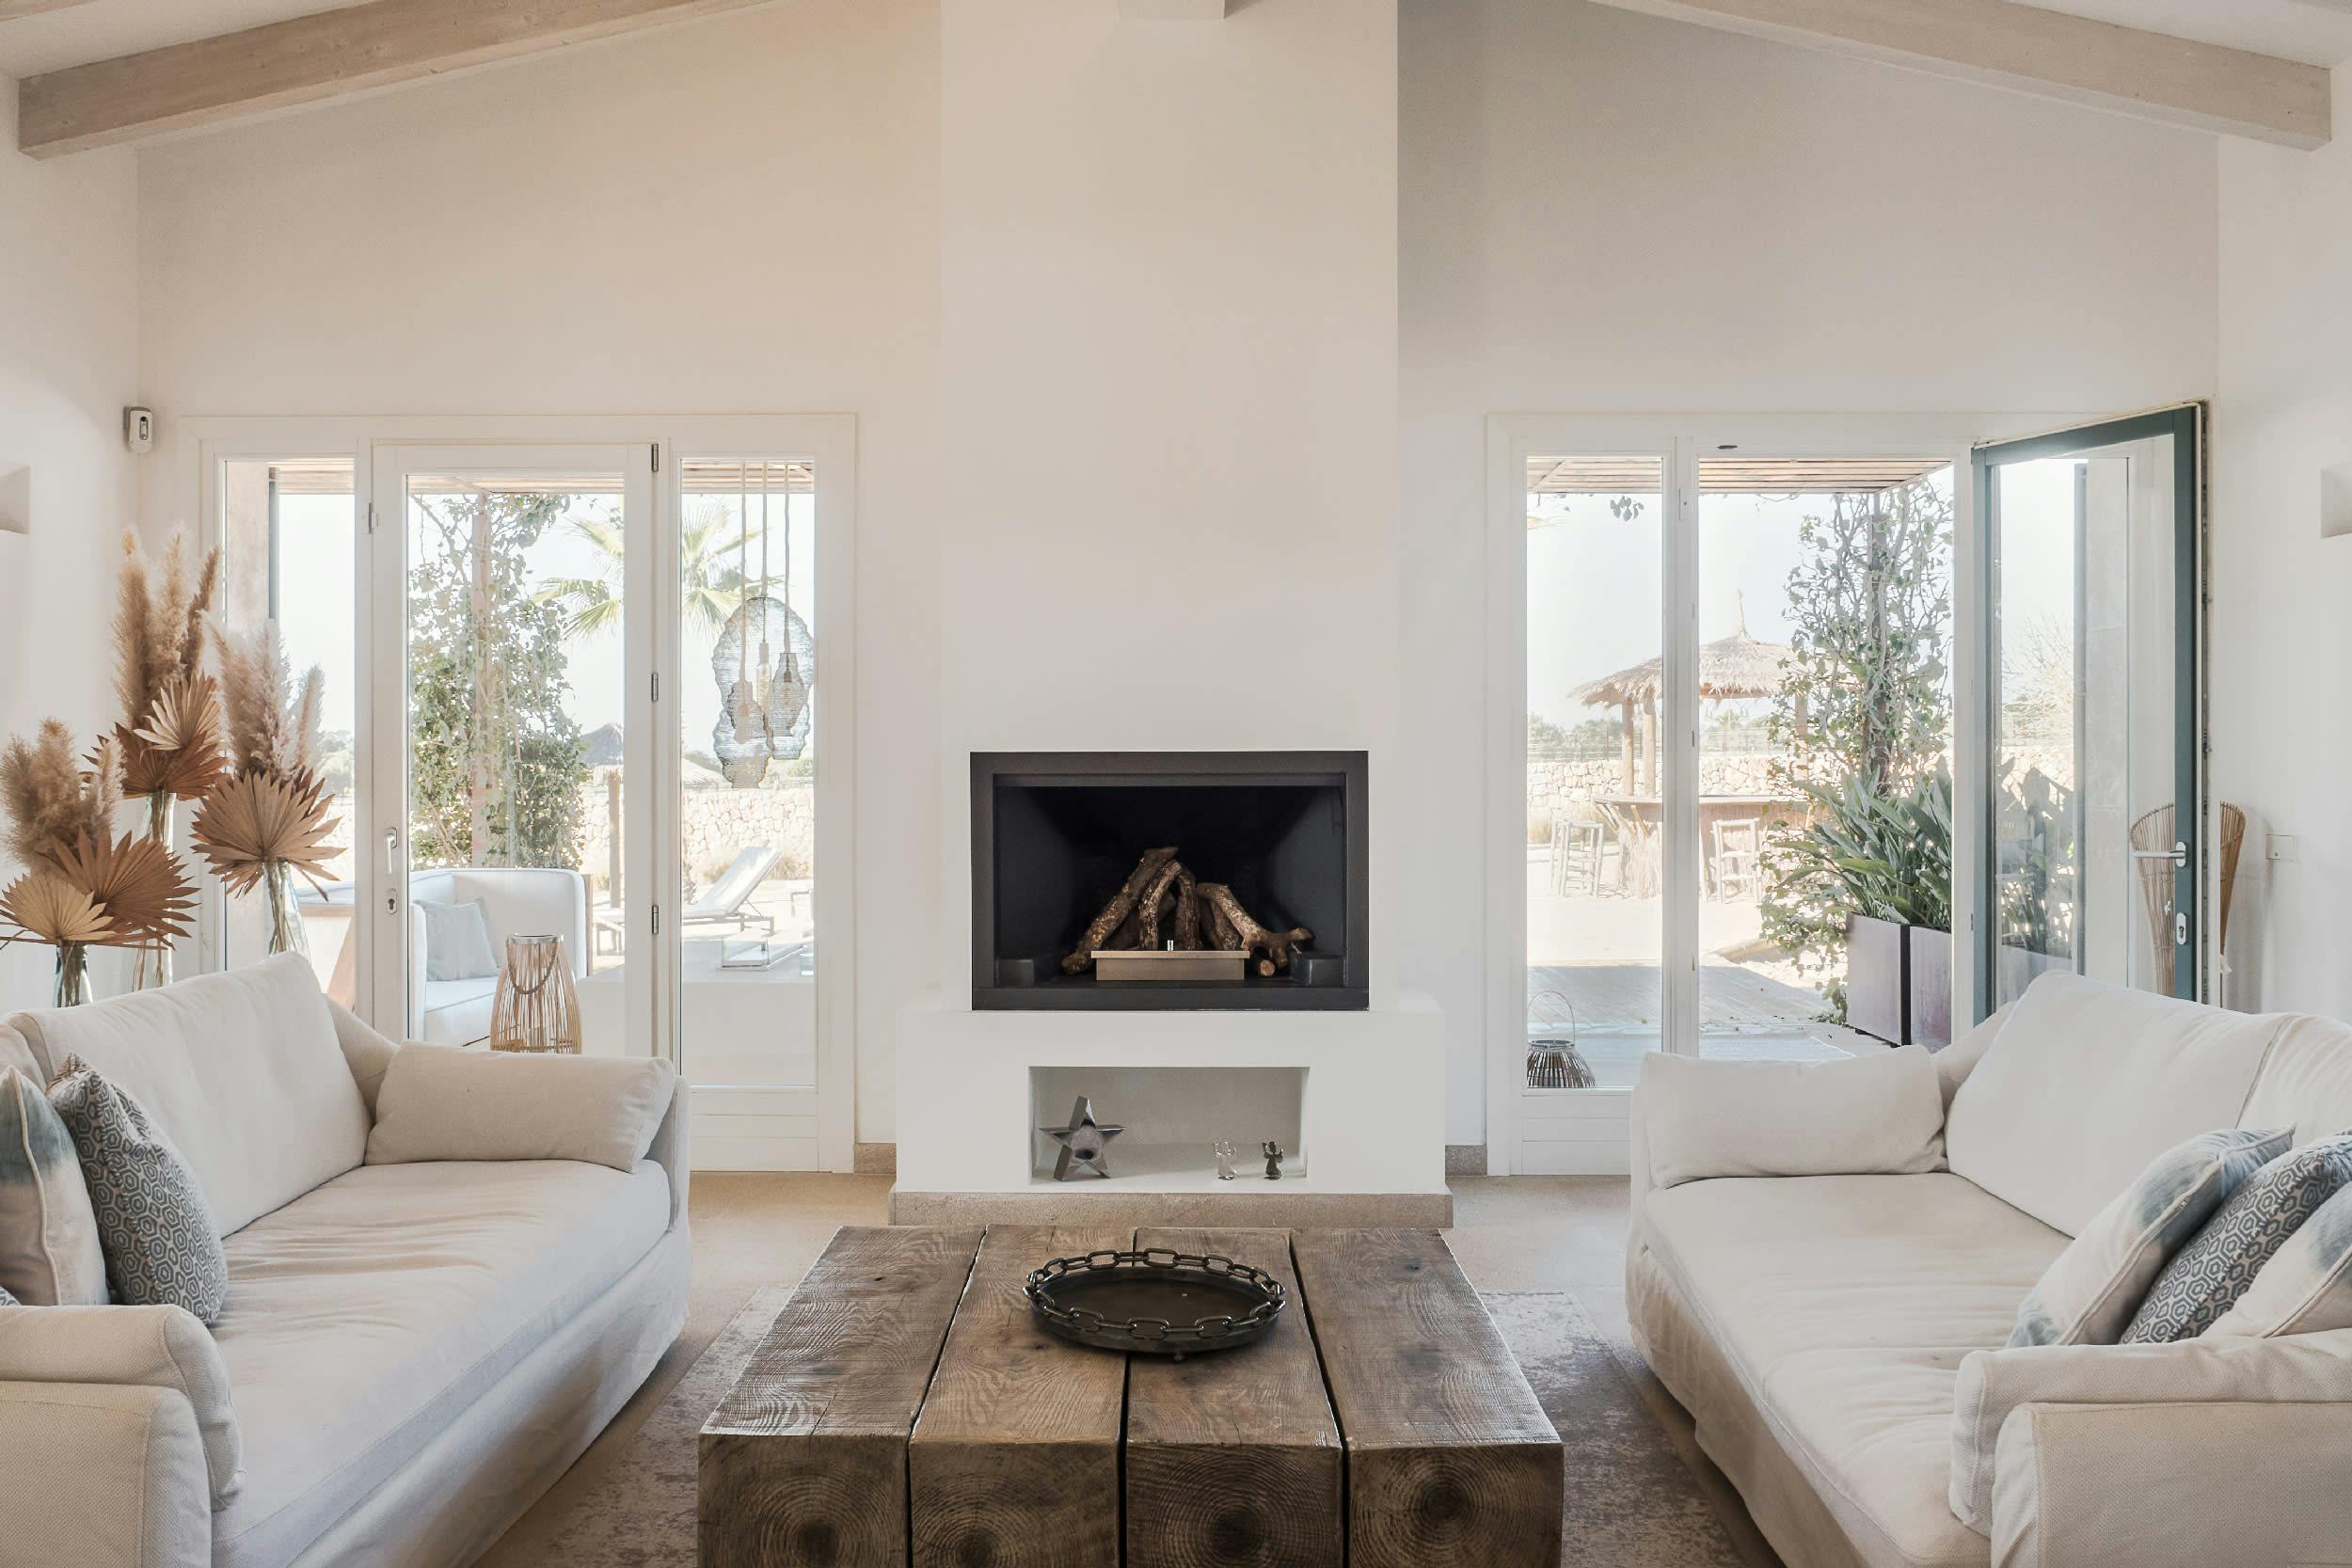 The image features a modern, white living room with a fireplace, a large window, and a couch.